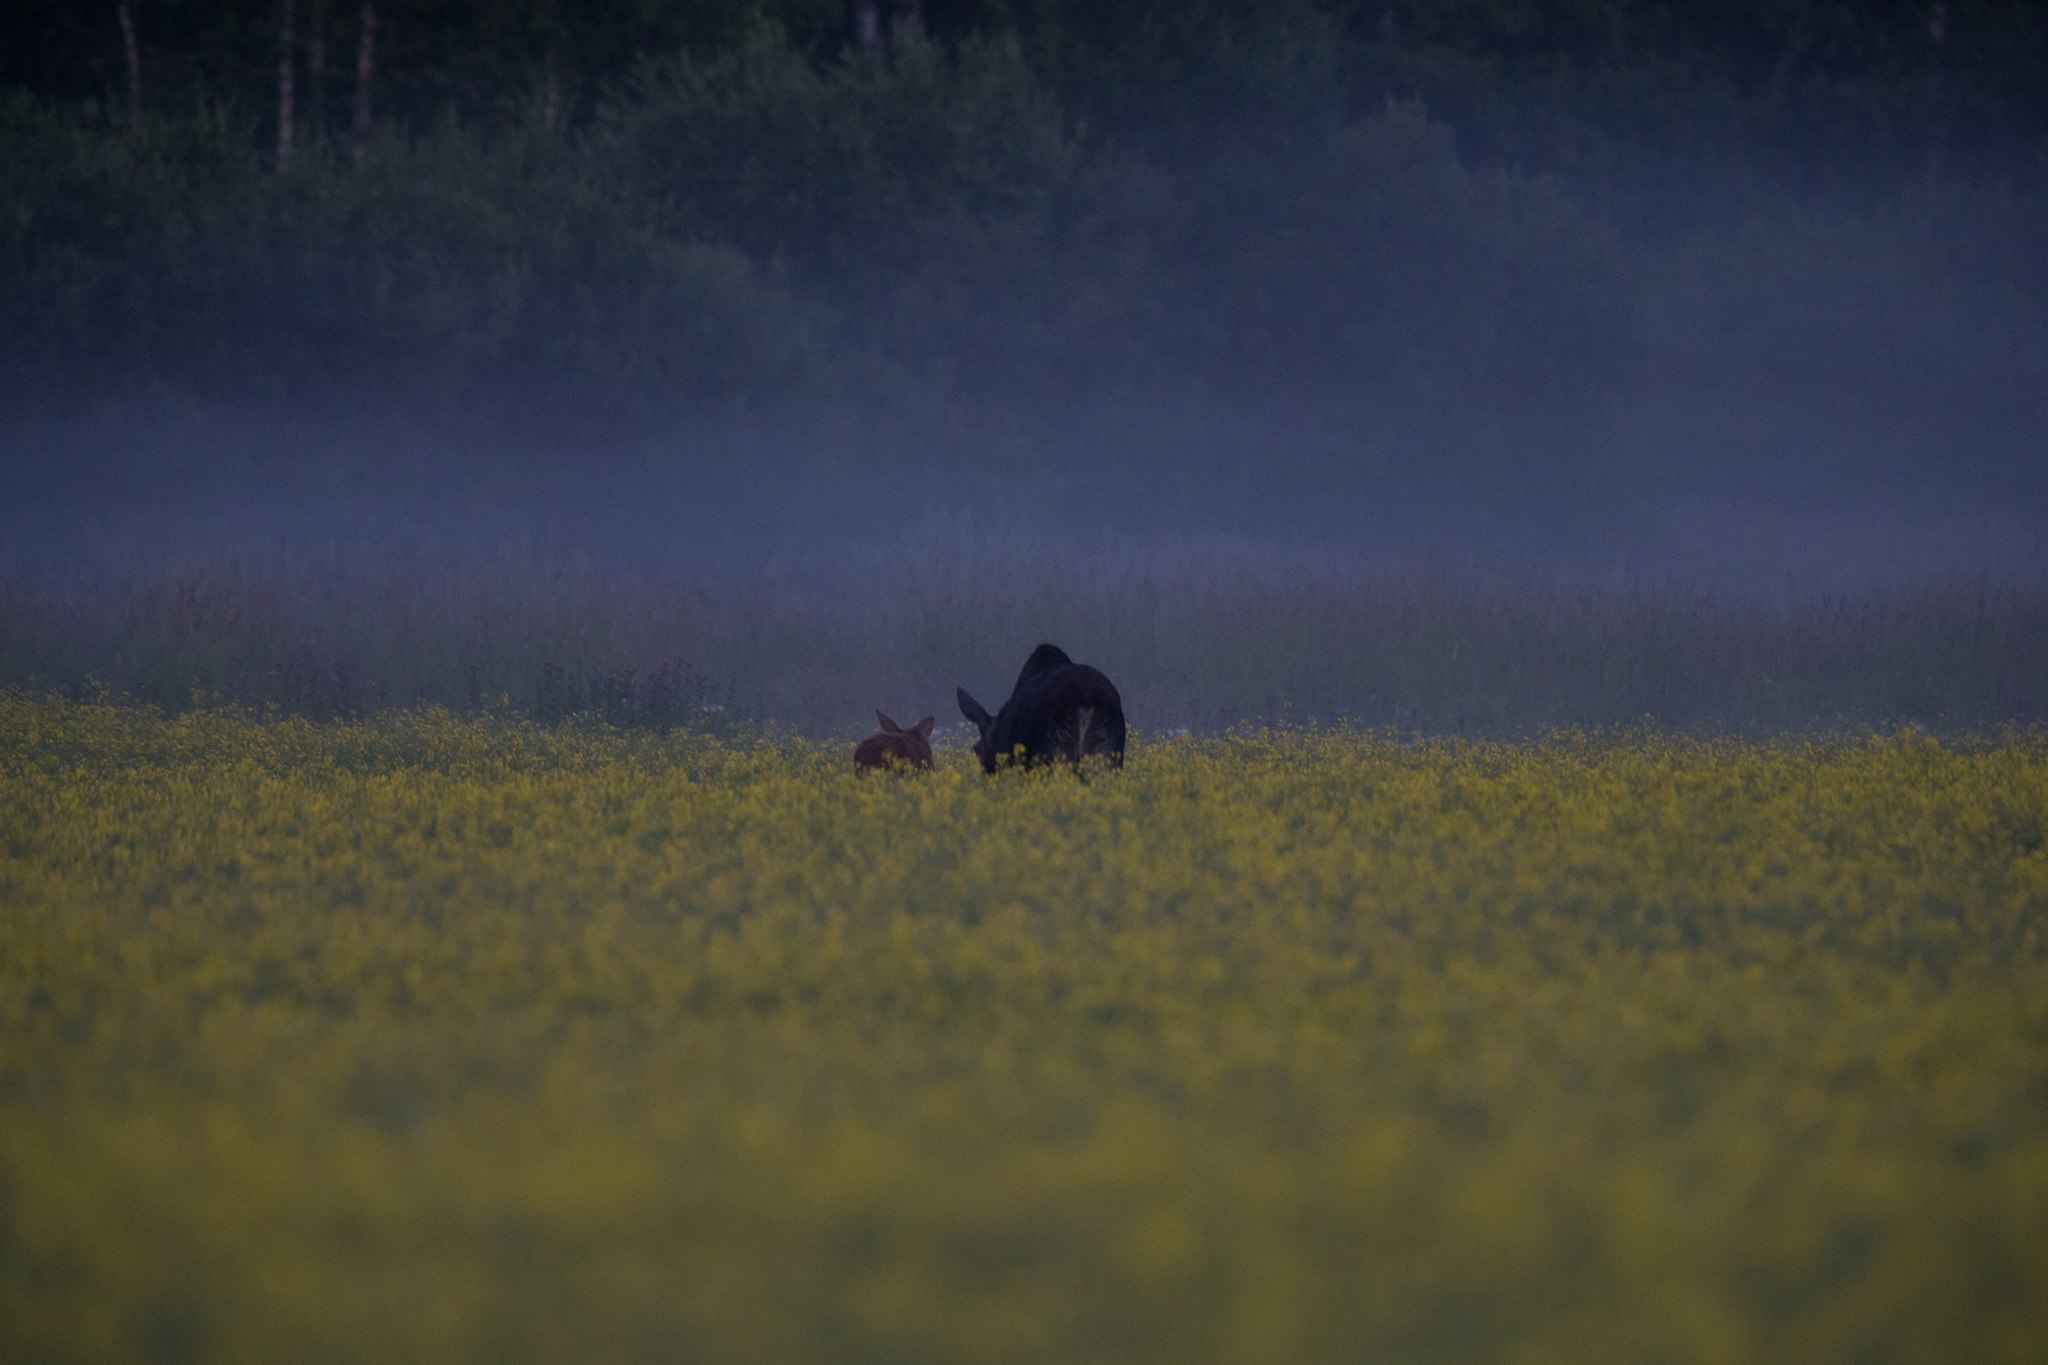 Elk family eating on a yellow field